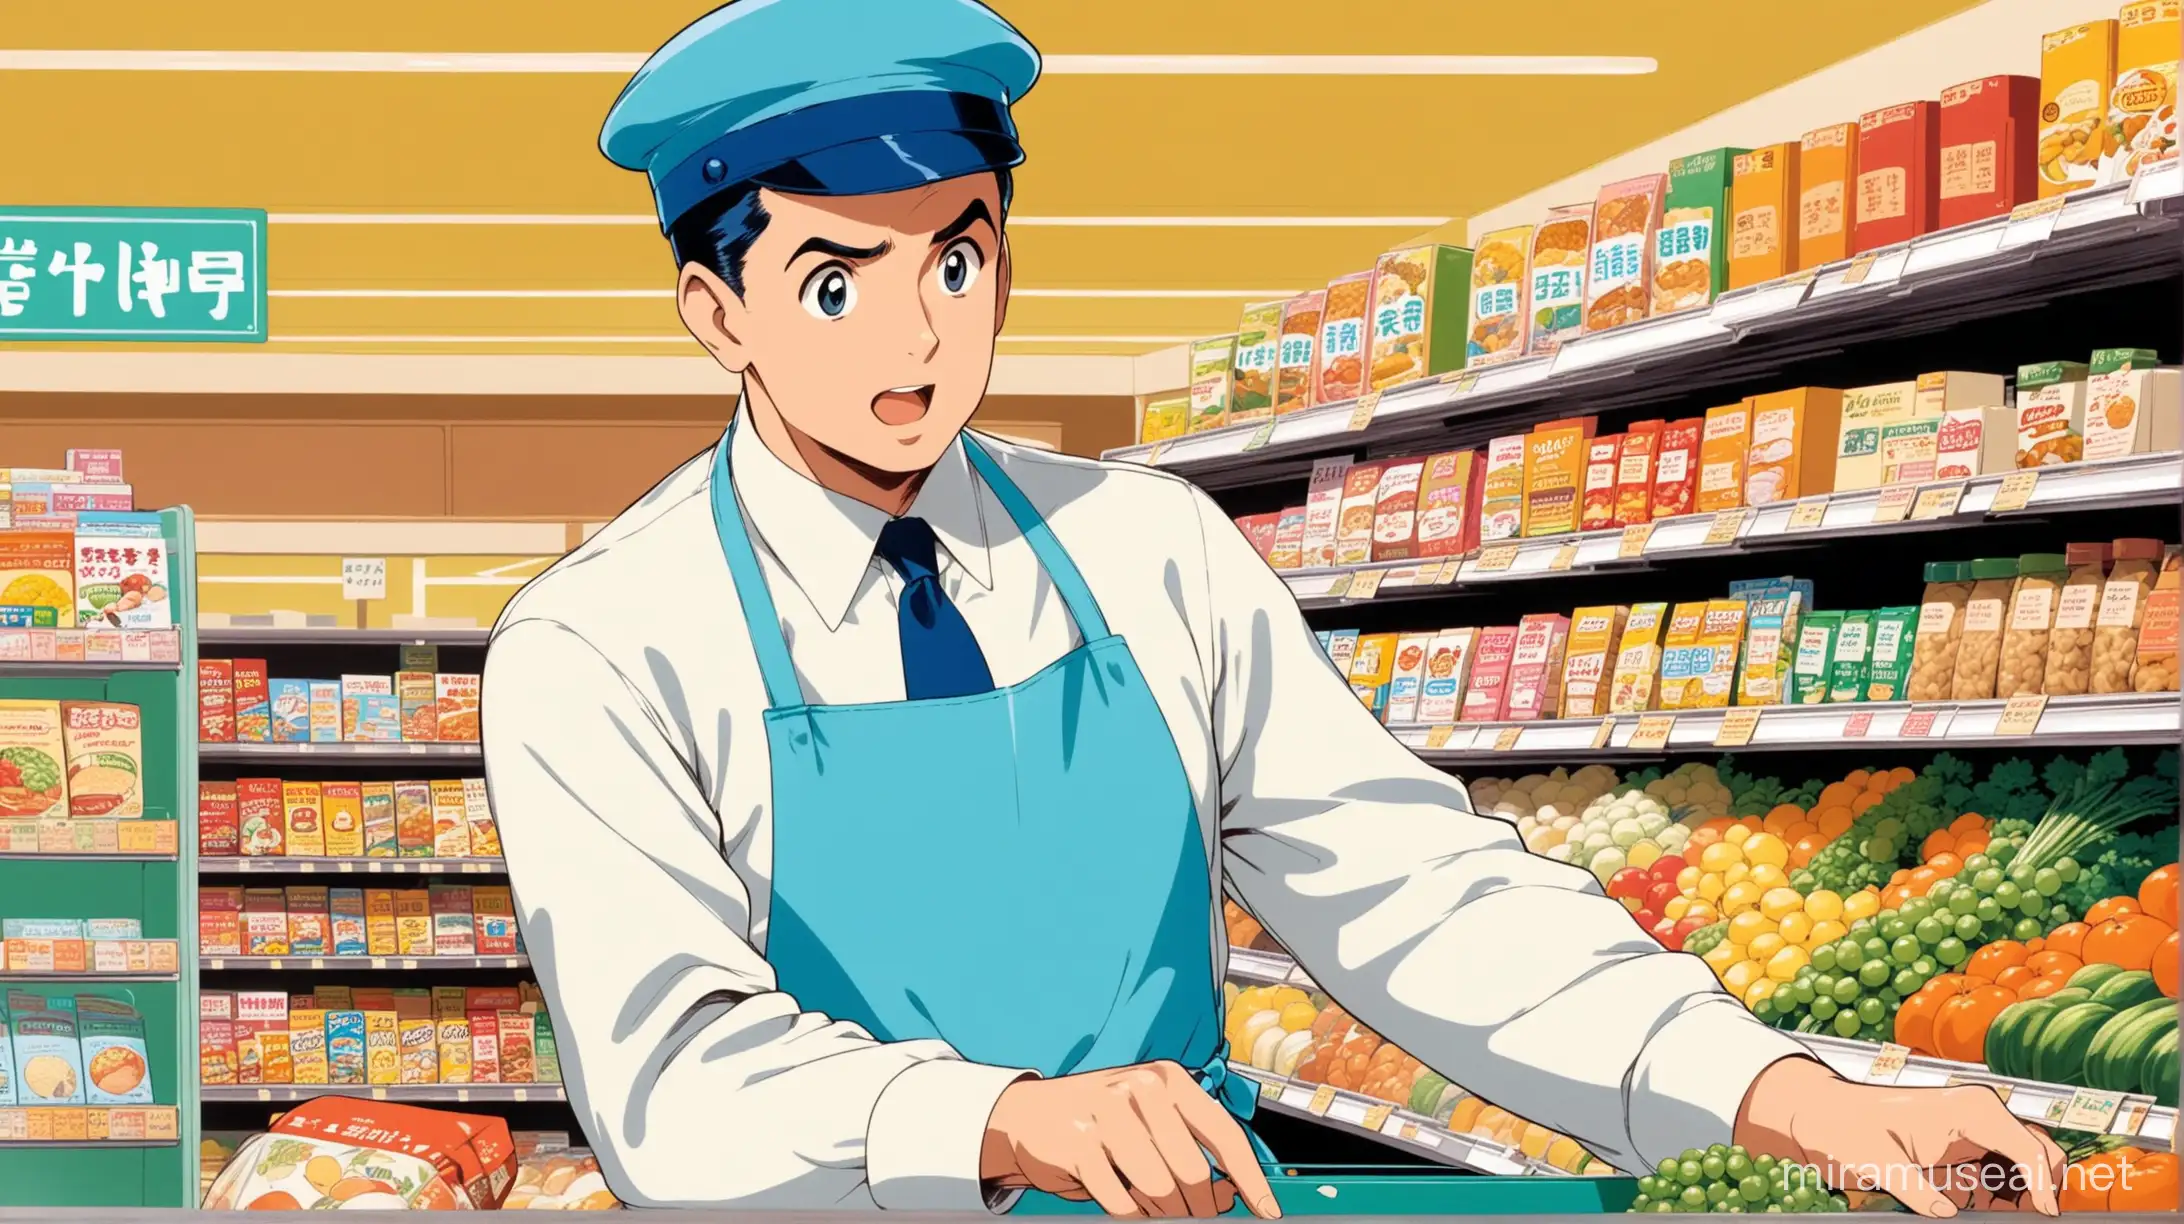 a man in a baby blue apron, blue hat, white shirt and a blue tie is a 1950s clerk. He is teaching an English lesson in a grocery store. vintage anime.